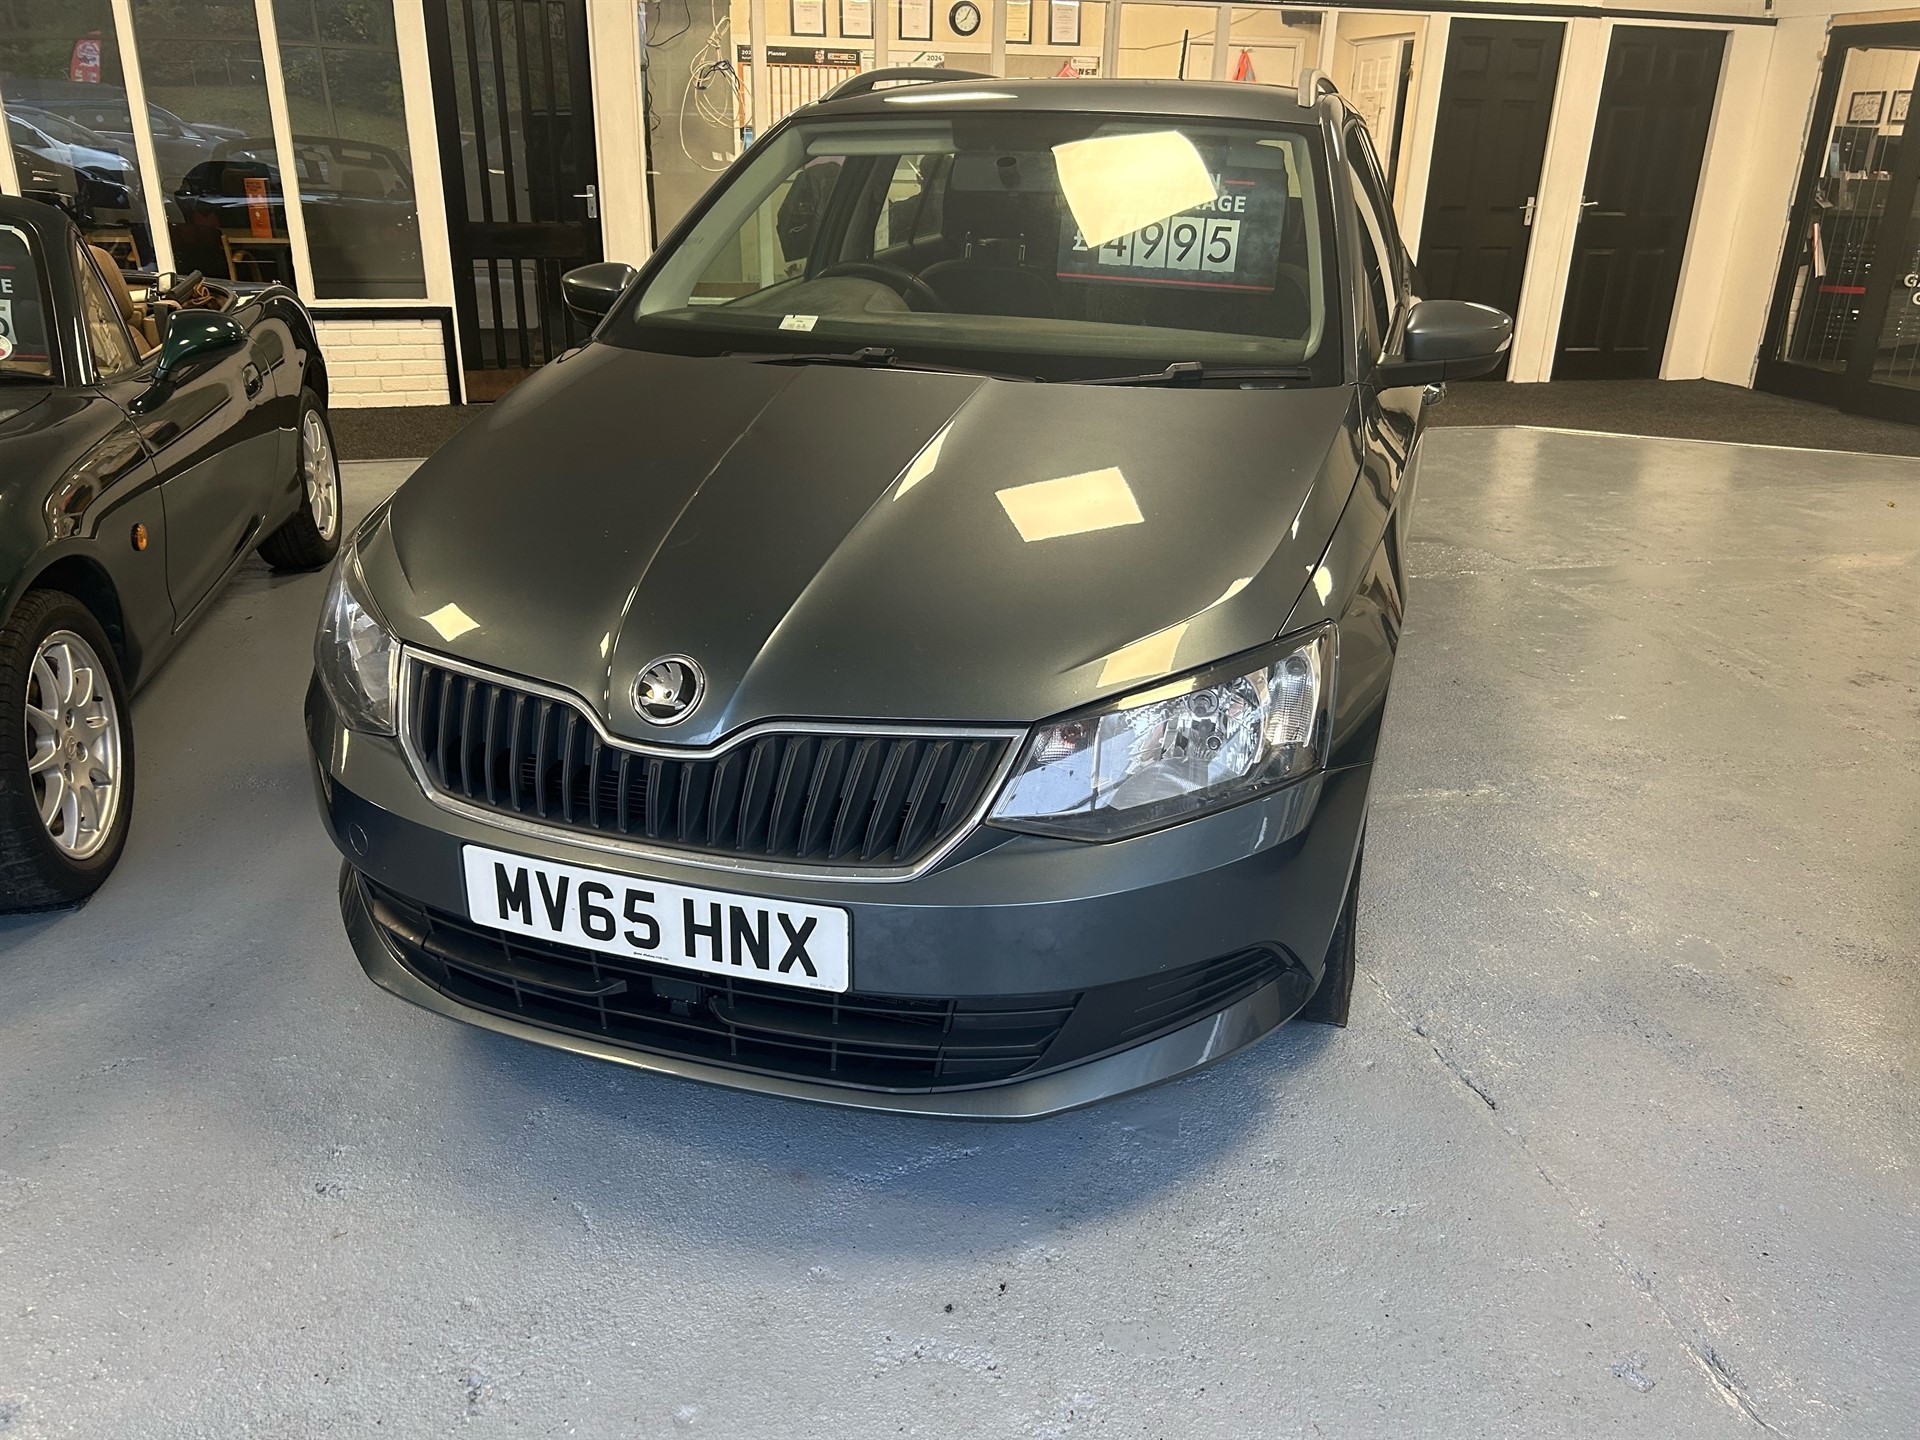 Used Skoda Fabia for sale in Catterick Garrison, North Yorkshire